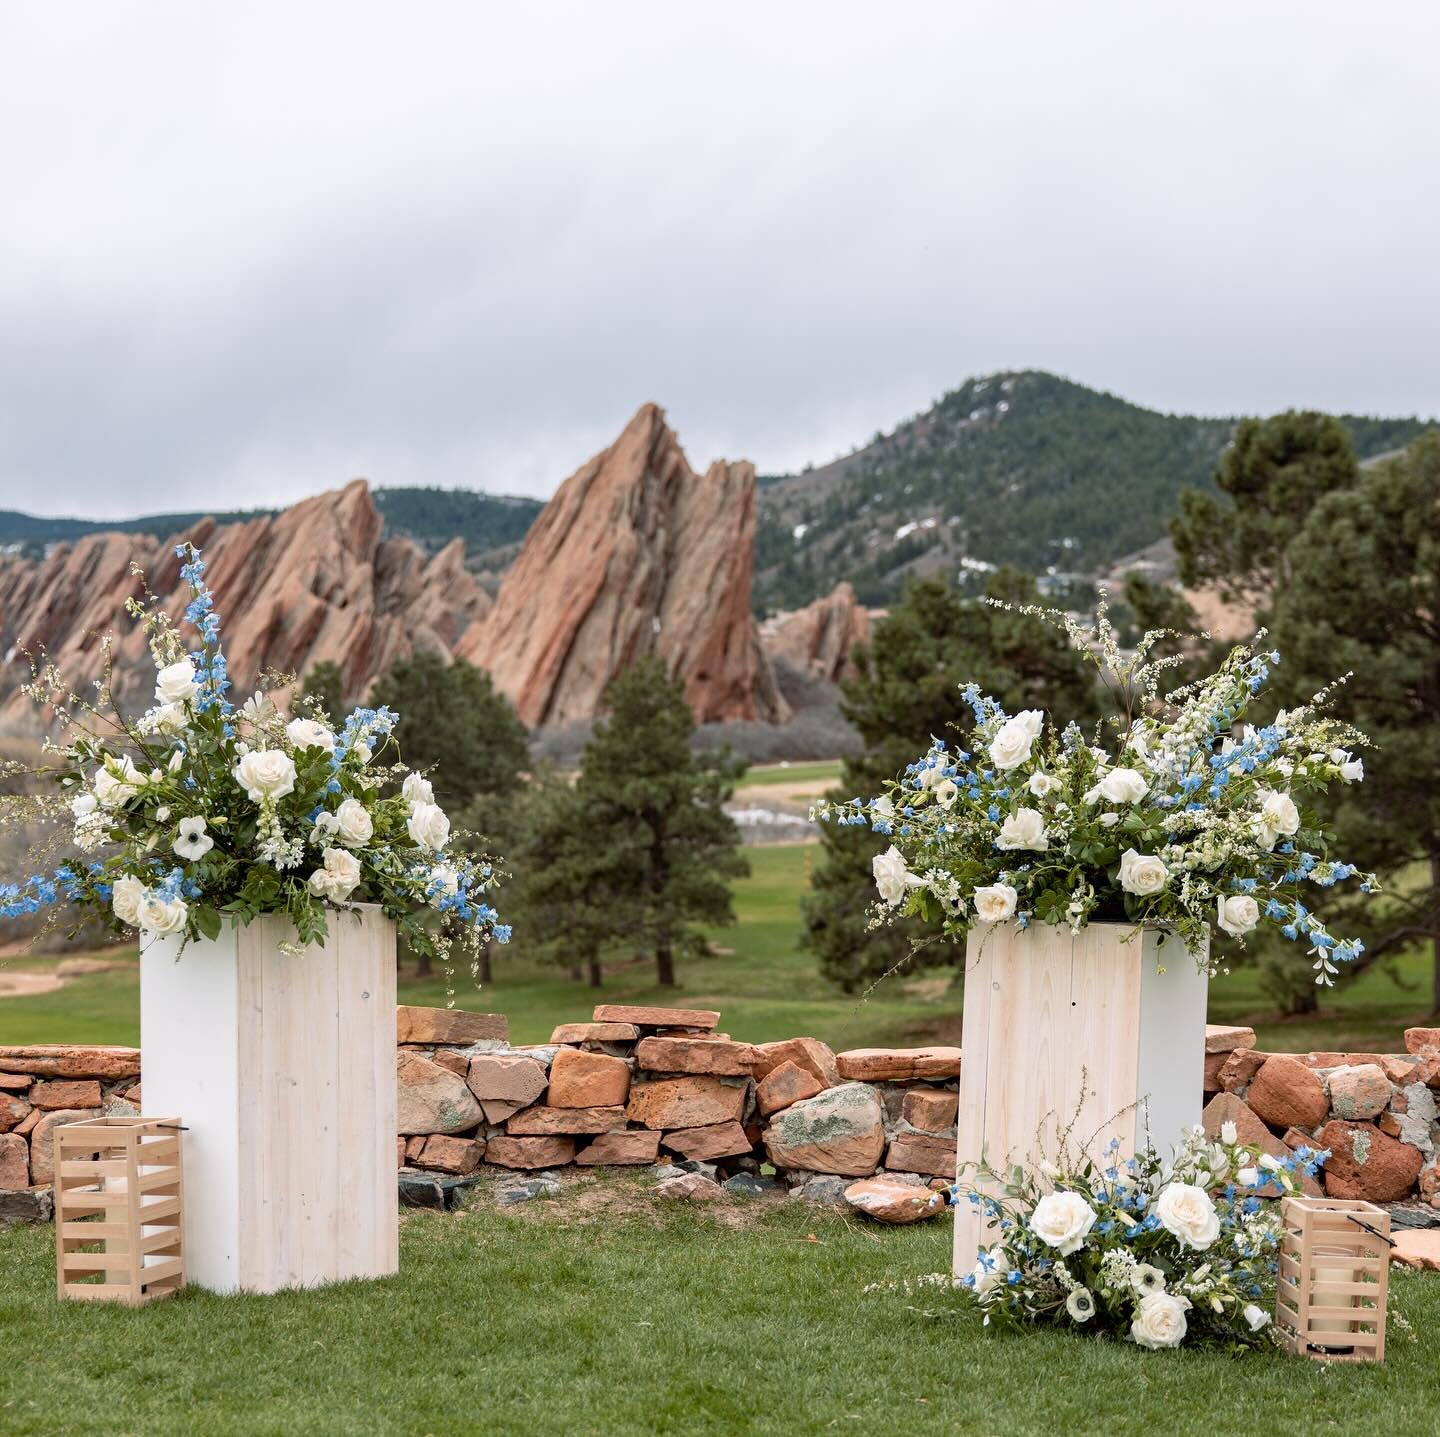 Embracing tradition by letting your something blue come through by pops of blue through your wedding flowers 💙

@arrowheadcoloradoevents 
@daintydetailscolorado 
@elevatephotography